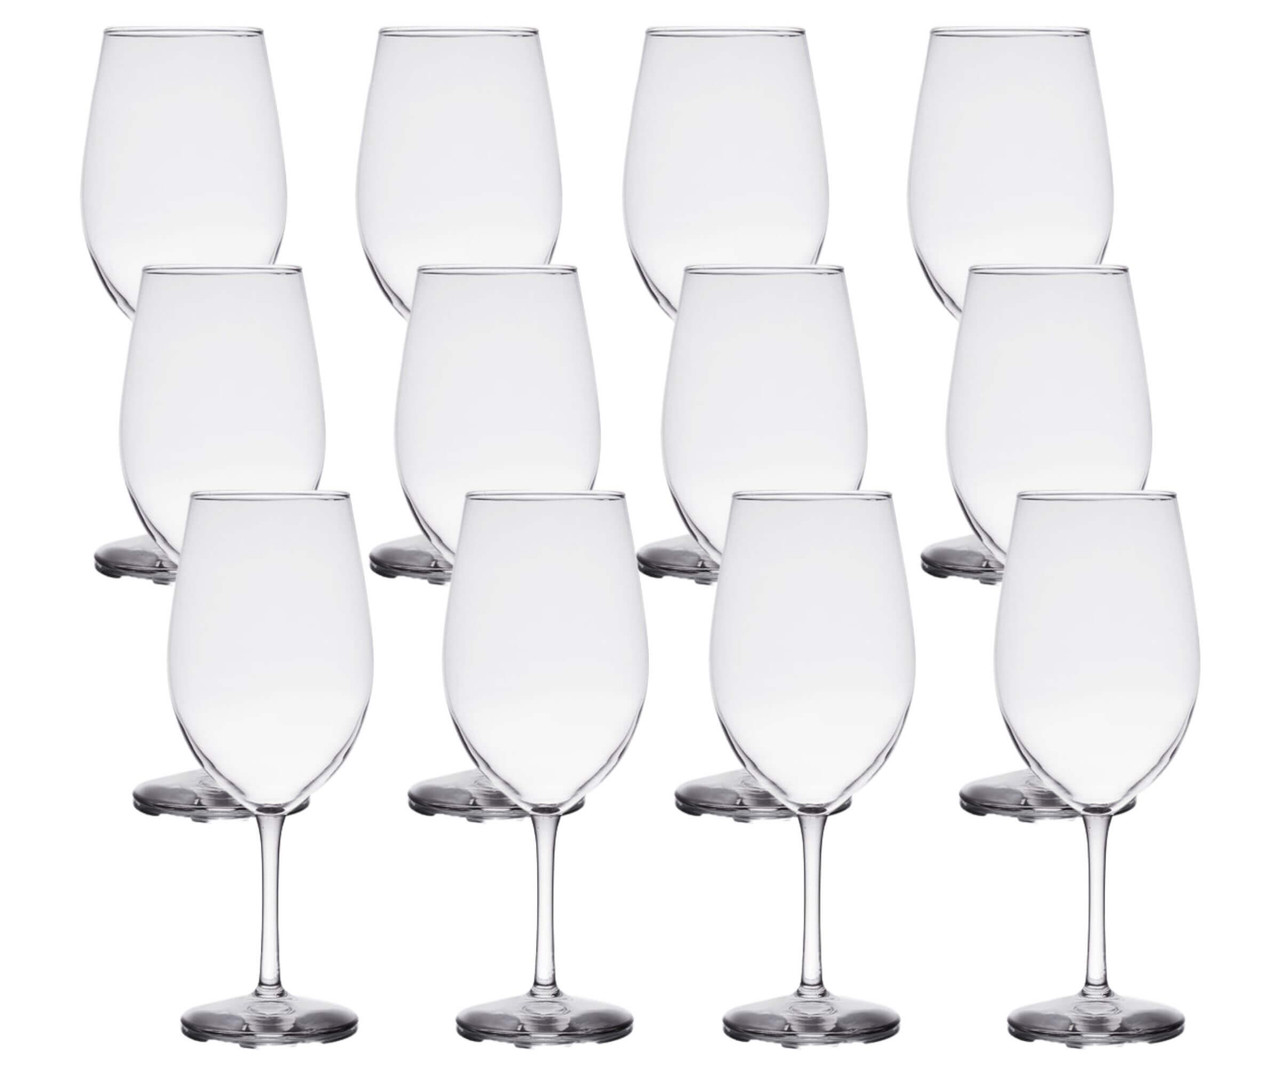 Libbey Vina Case of 12 Wine Glasses - 18 oz. for Enhanced Wine Enjoyment-Chicken Pieces